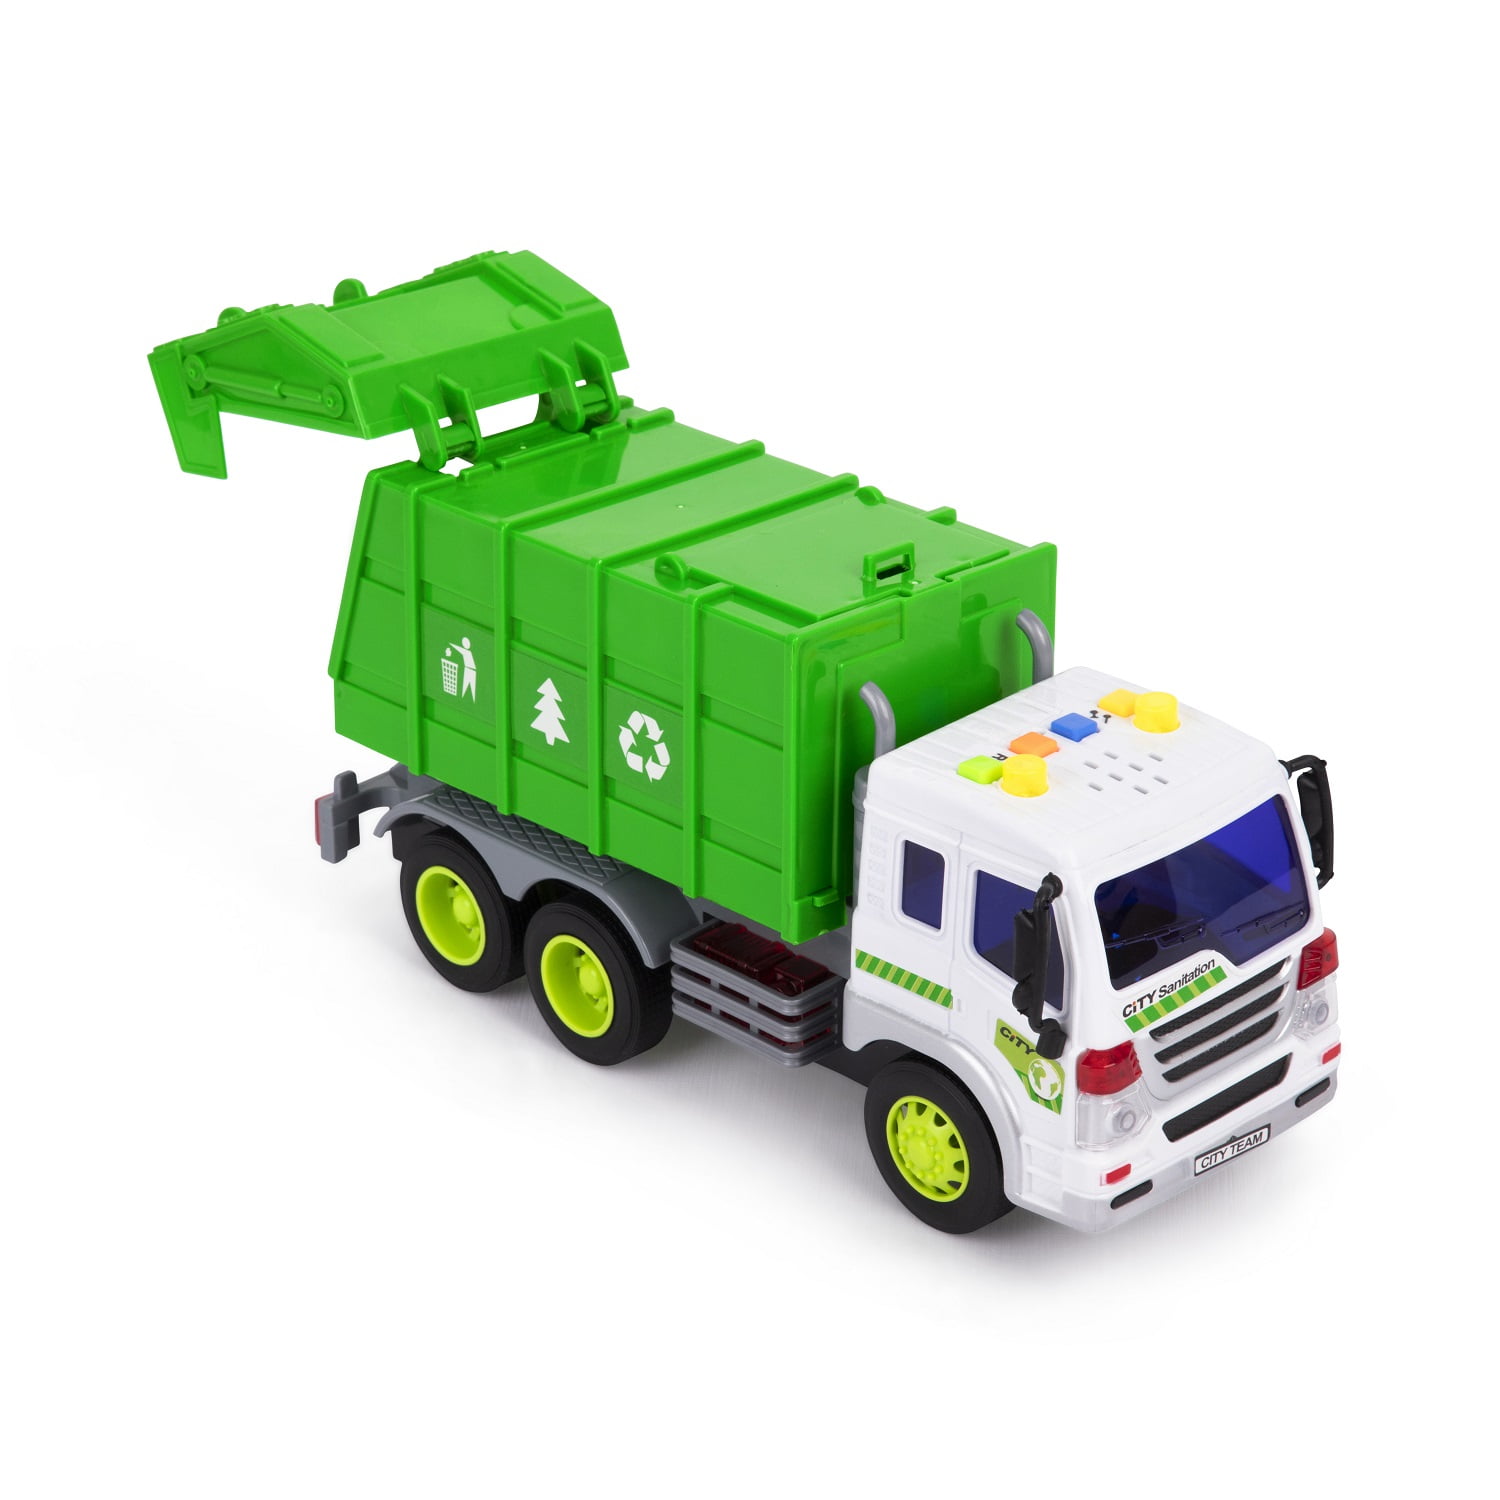 WolVol Friction Powered Garbage Truck Toy With Lights and Sounds For Kids 